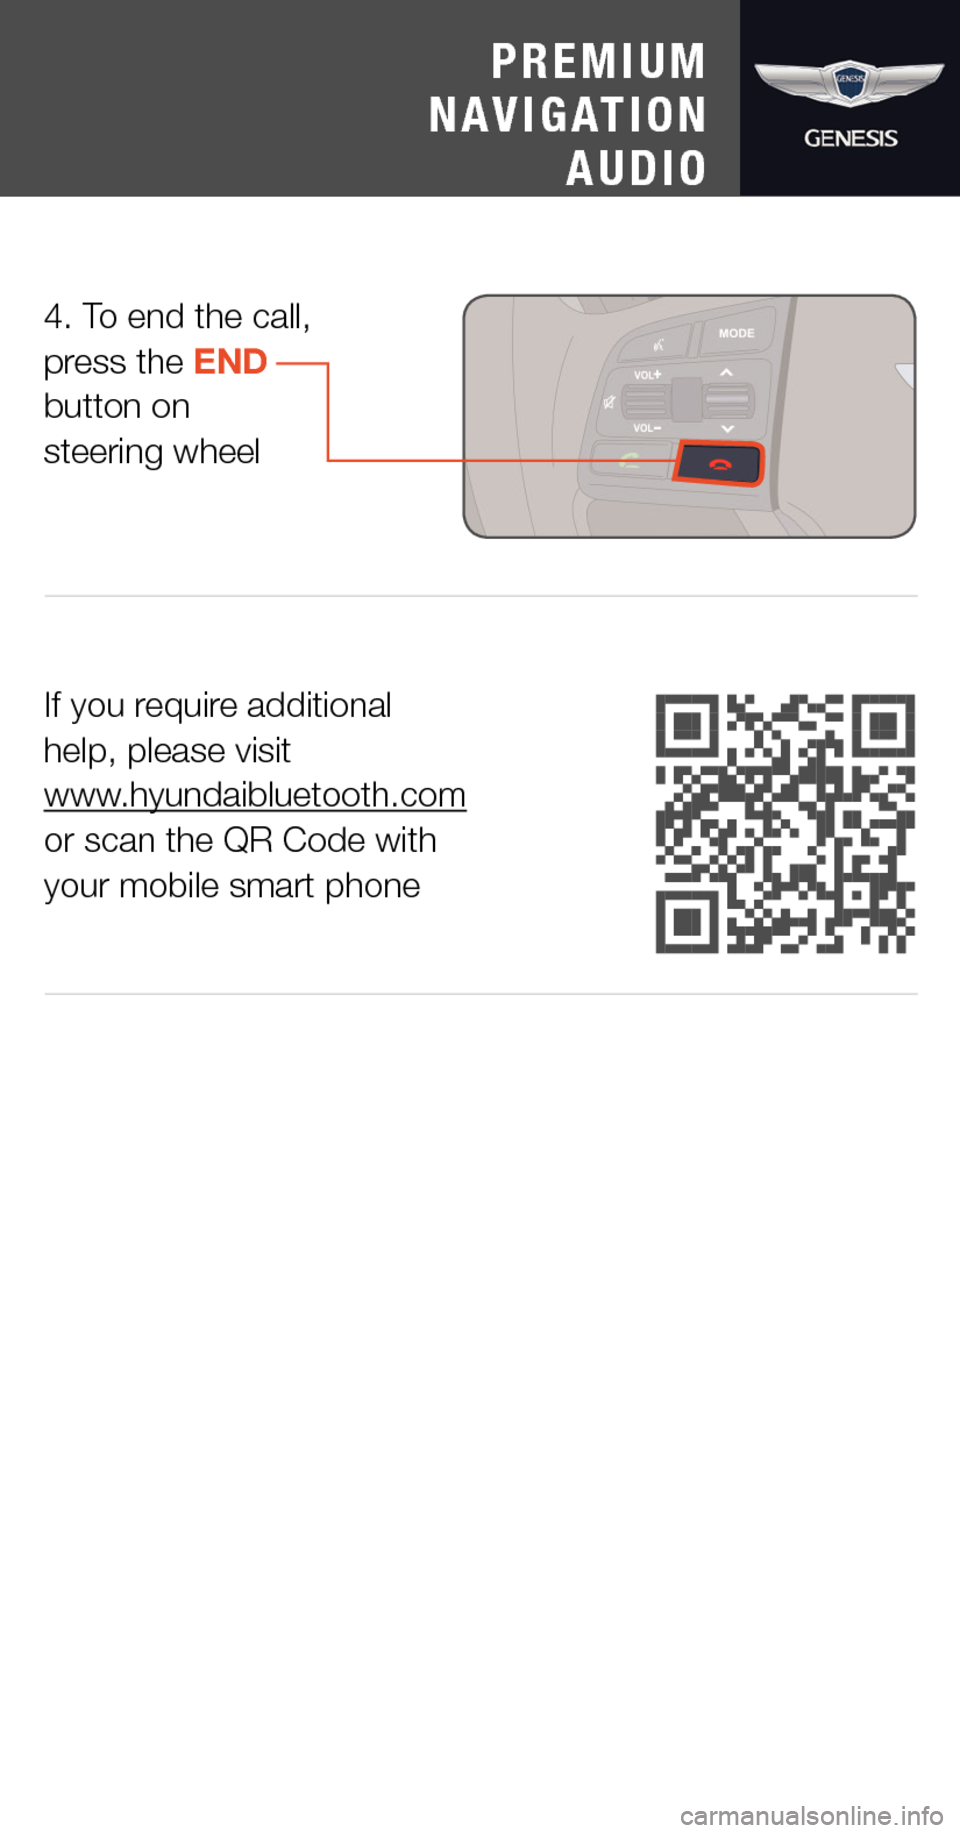 Hyundai Genesis 2015  Quick Tips If you require additional  help, please visit  www.hyundaibluetooth.com or scan the QR Code with  your mobile smart phone
4. To end the call, press the END  button on  steering wheel
PREMIUM
NAVIGATIO